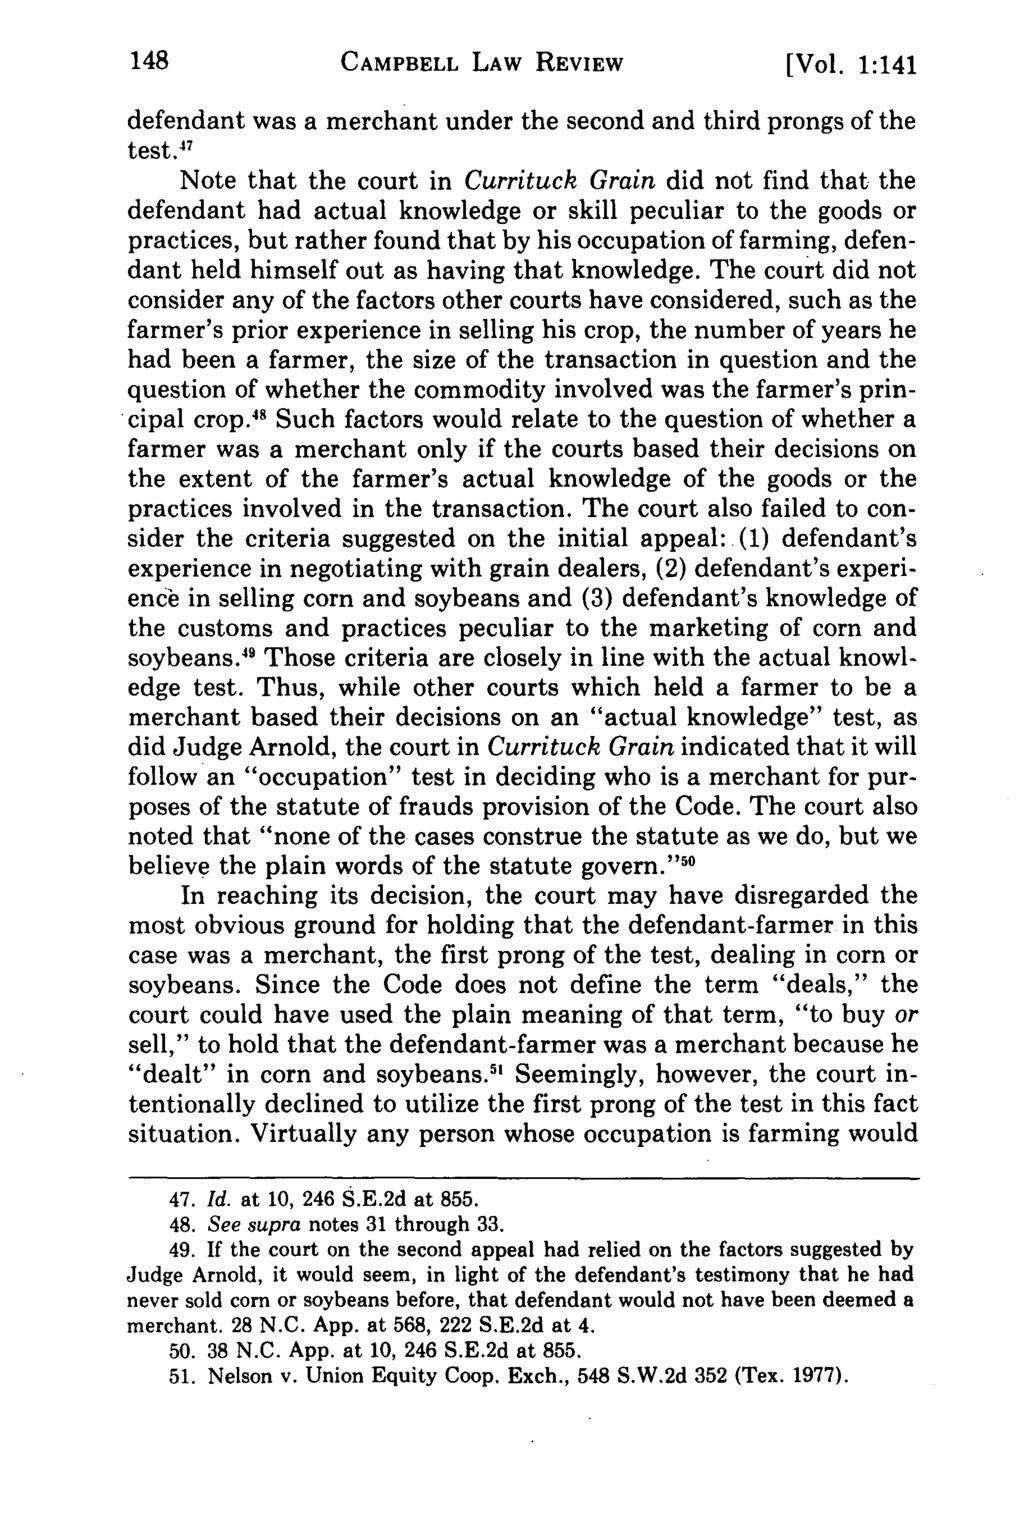 Campbell CAMPBELL Law Review, LAW Vol. 1, REVIEW Iss. 1 [1979], Art. 6 [Vol. 1:141 defendant was a merchant under the second and third prongs of the test.